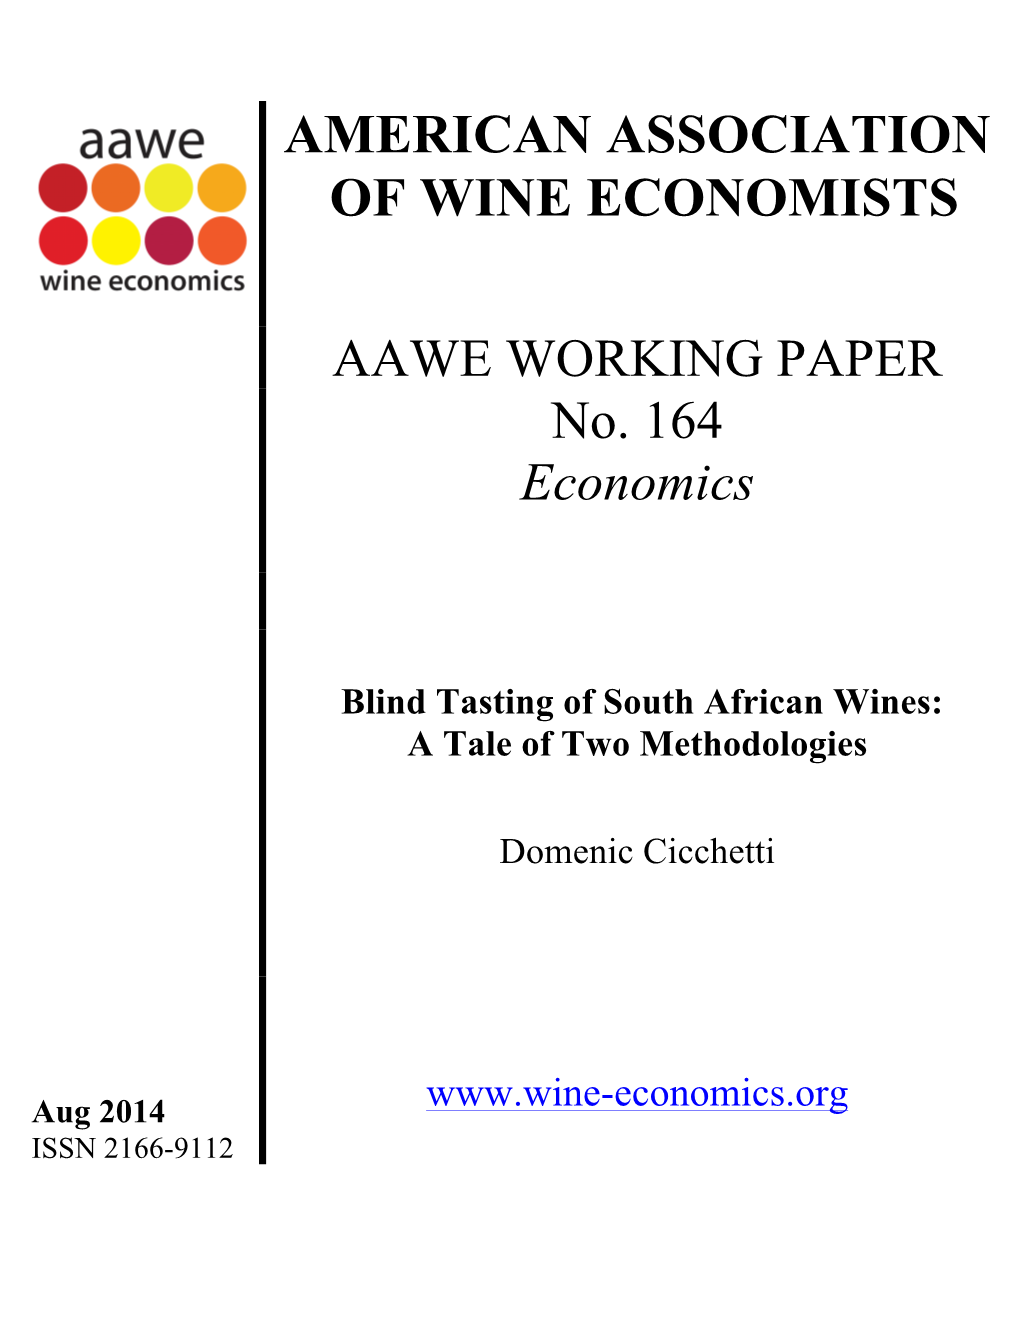 Economics Blind Tasting of South African Wines